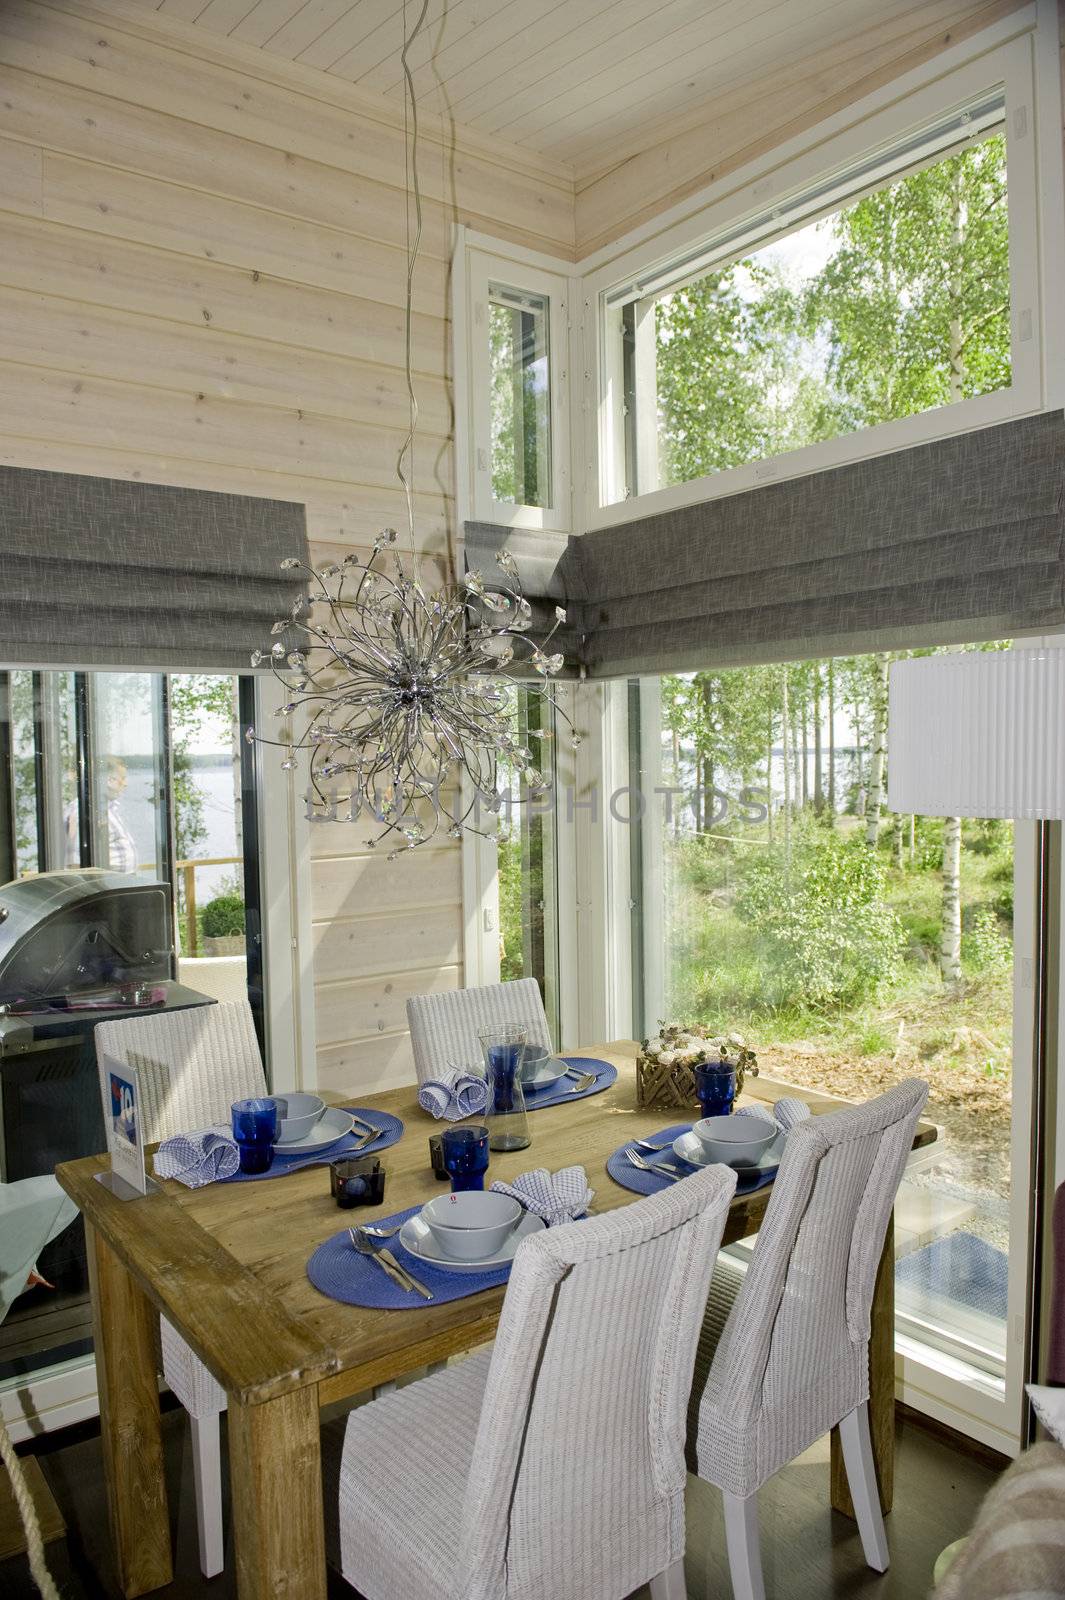 Traditional interior of Finnish summer wooden cottage